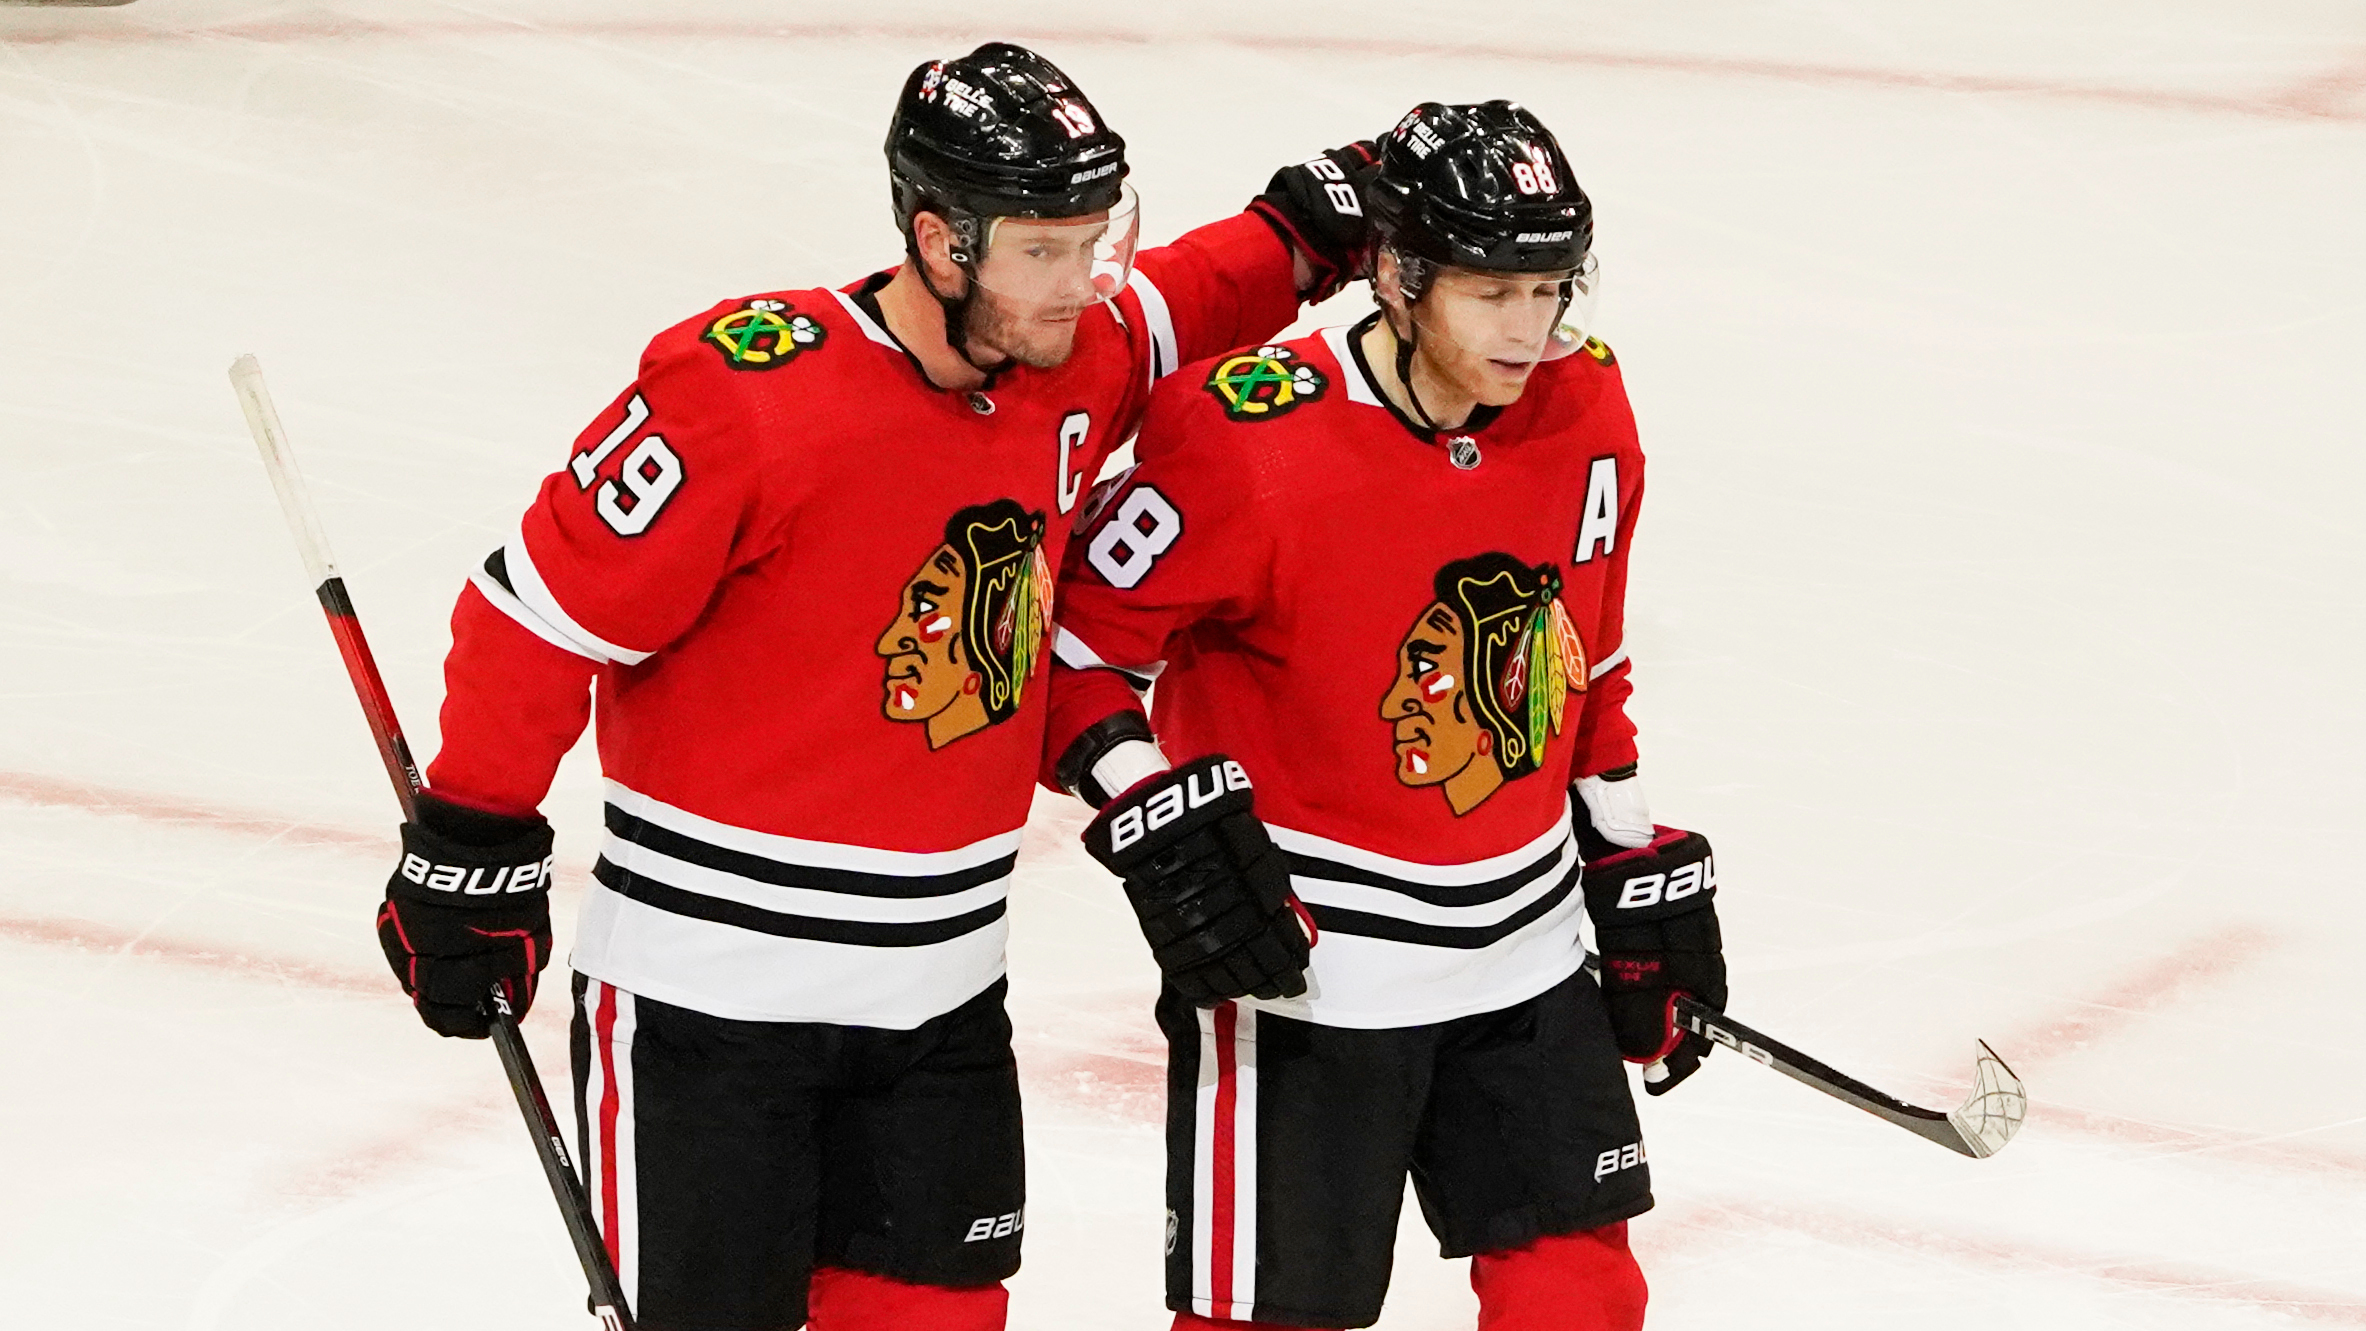 Blackhawks winger Artemi Panarin says sorry after saying he could